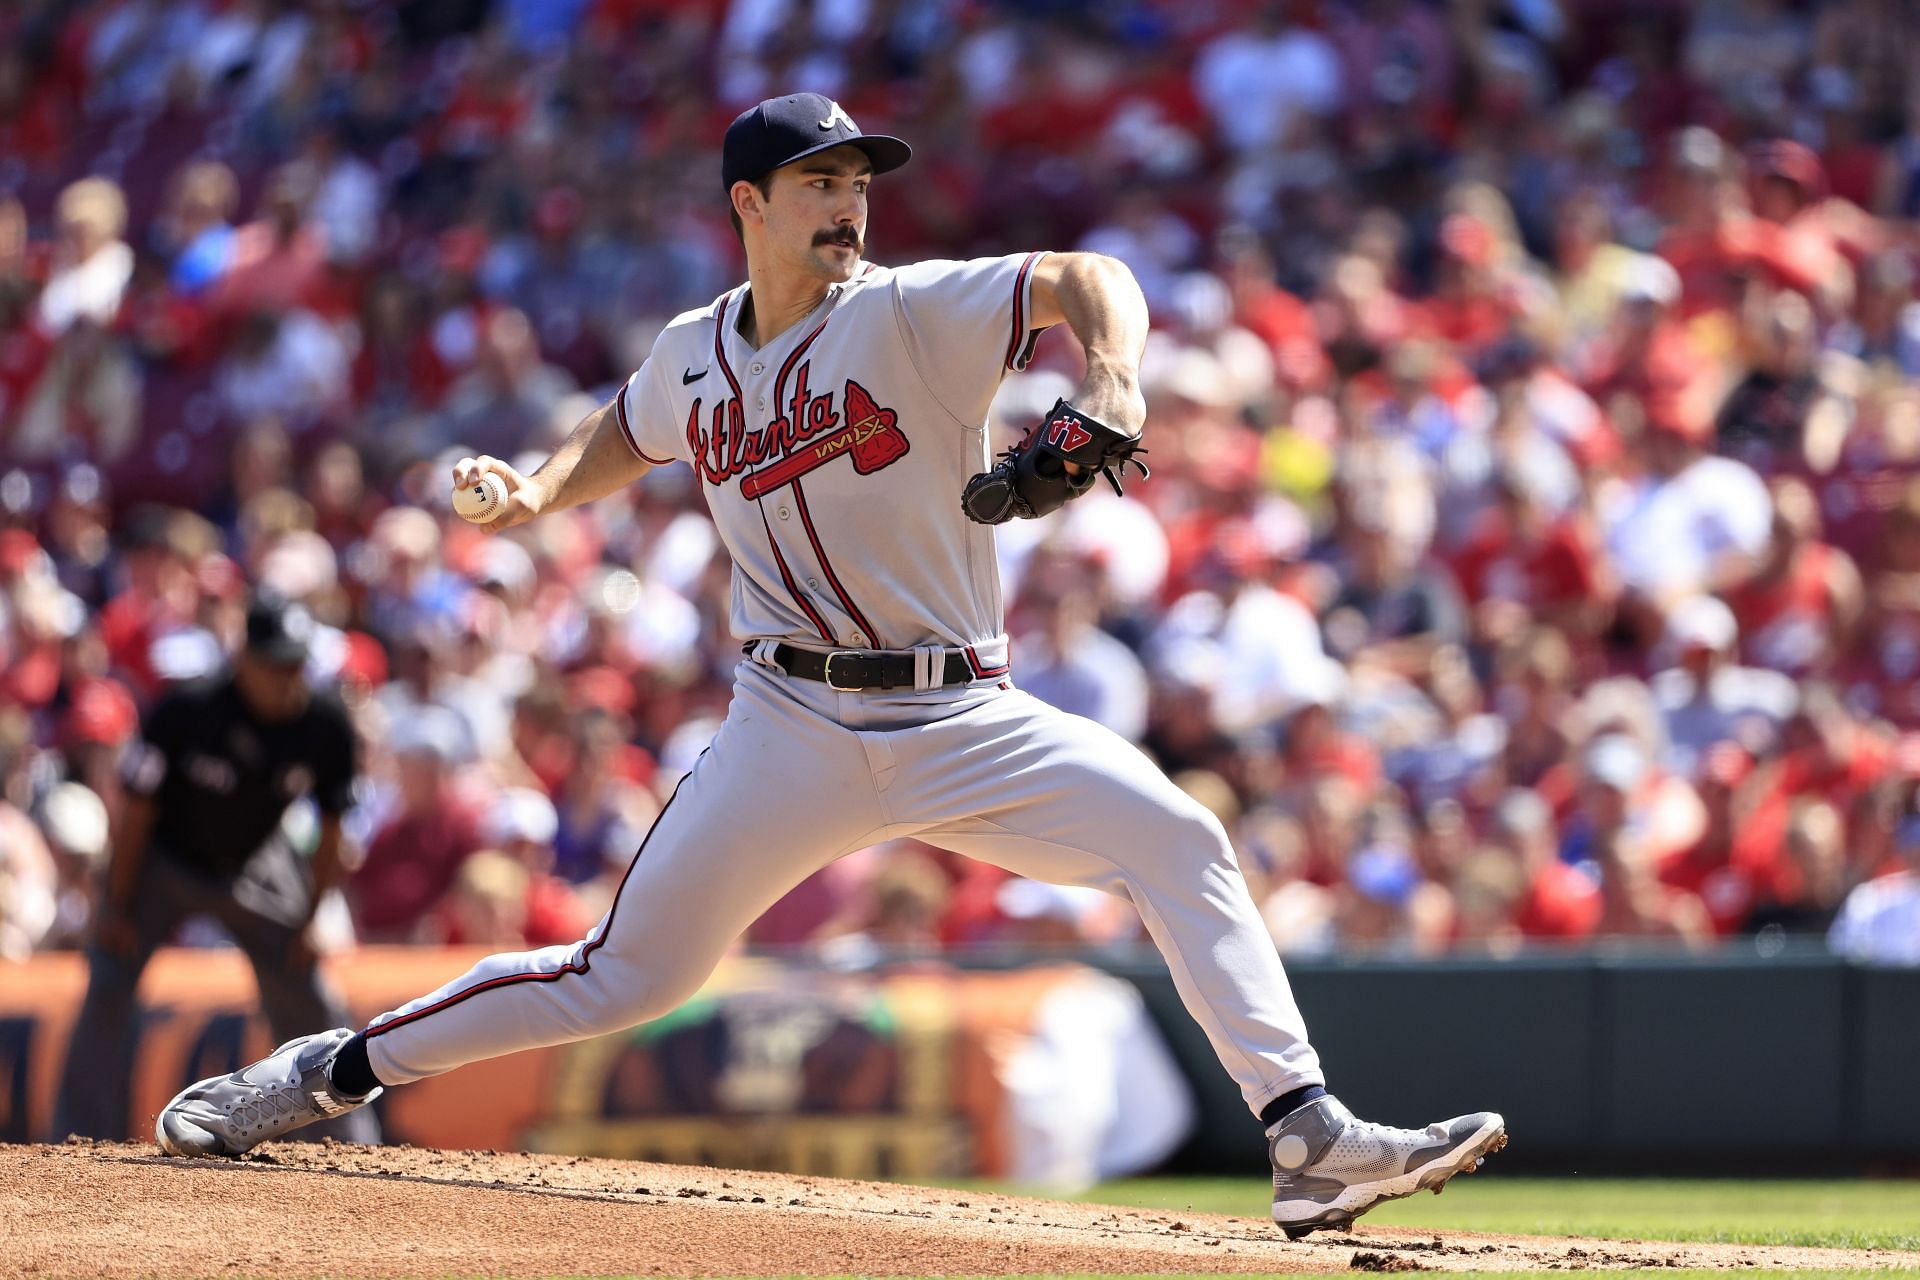 Strider strikes out 10 in 7 innings, Braves beat Giants 4-0 for 3rd  straight shutout - The San Diego Union-Tribune